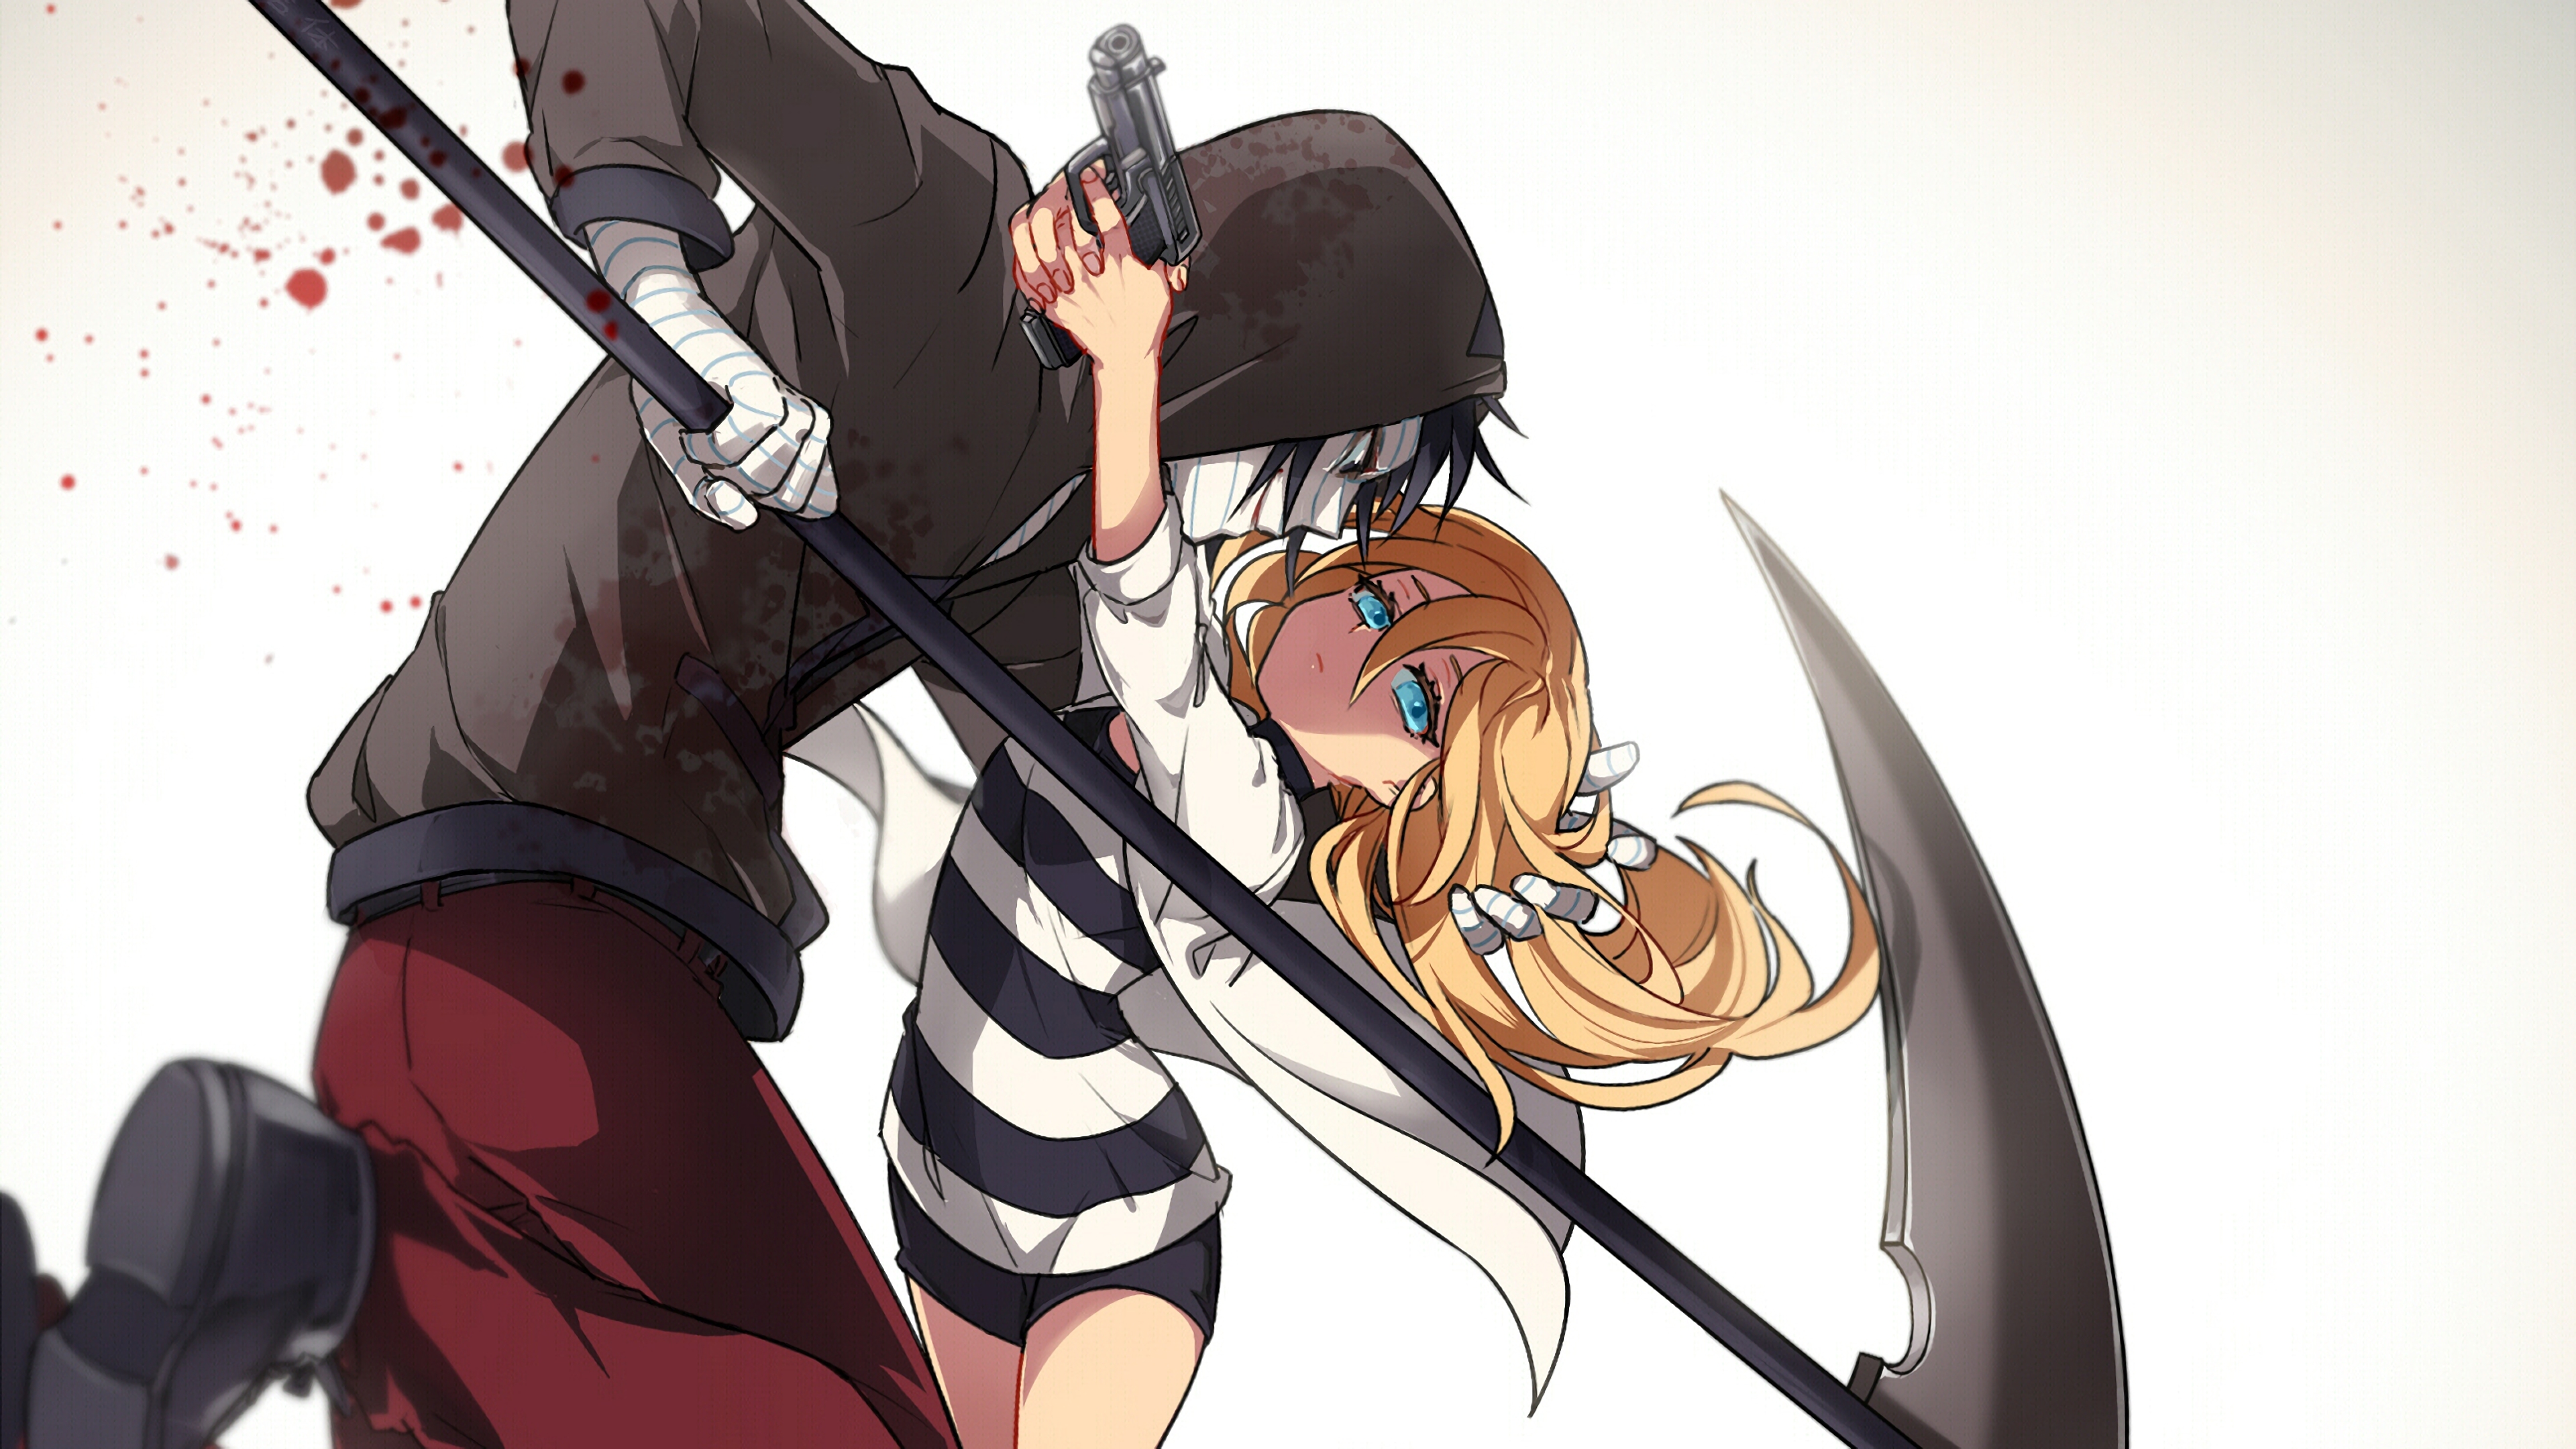 Amazon.com: Angels of Death (Satsuriku no Tenshi) Anime Fabric Wall Scroll  Poster (16x23) Inches [A] Angels of Death-1: Posters & Prints